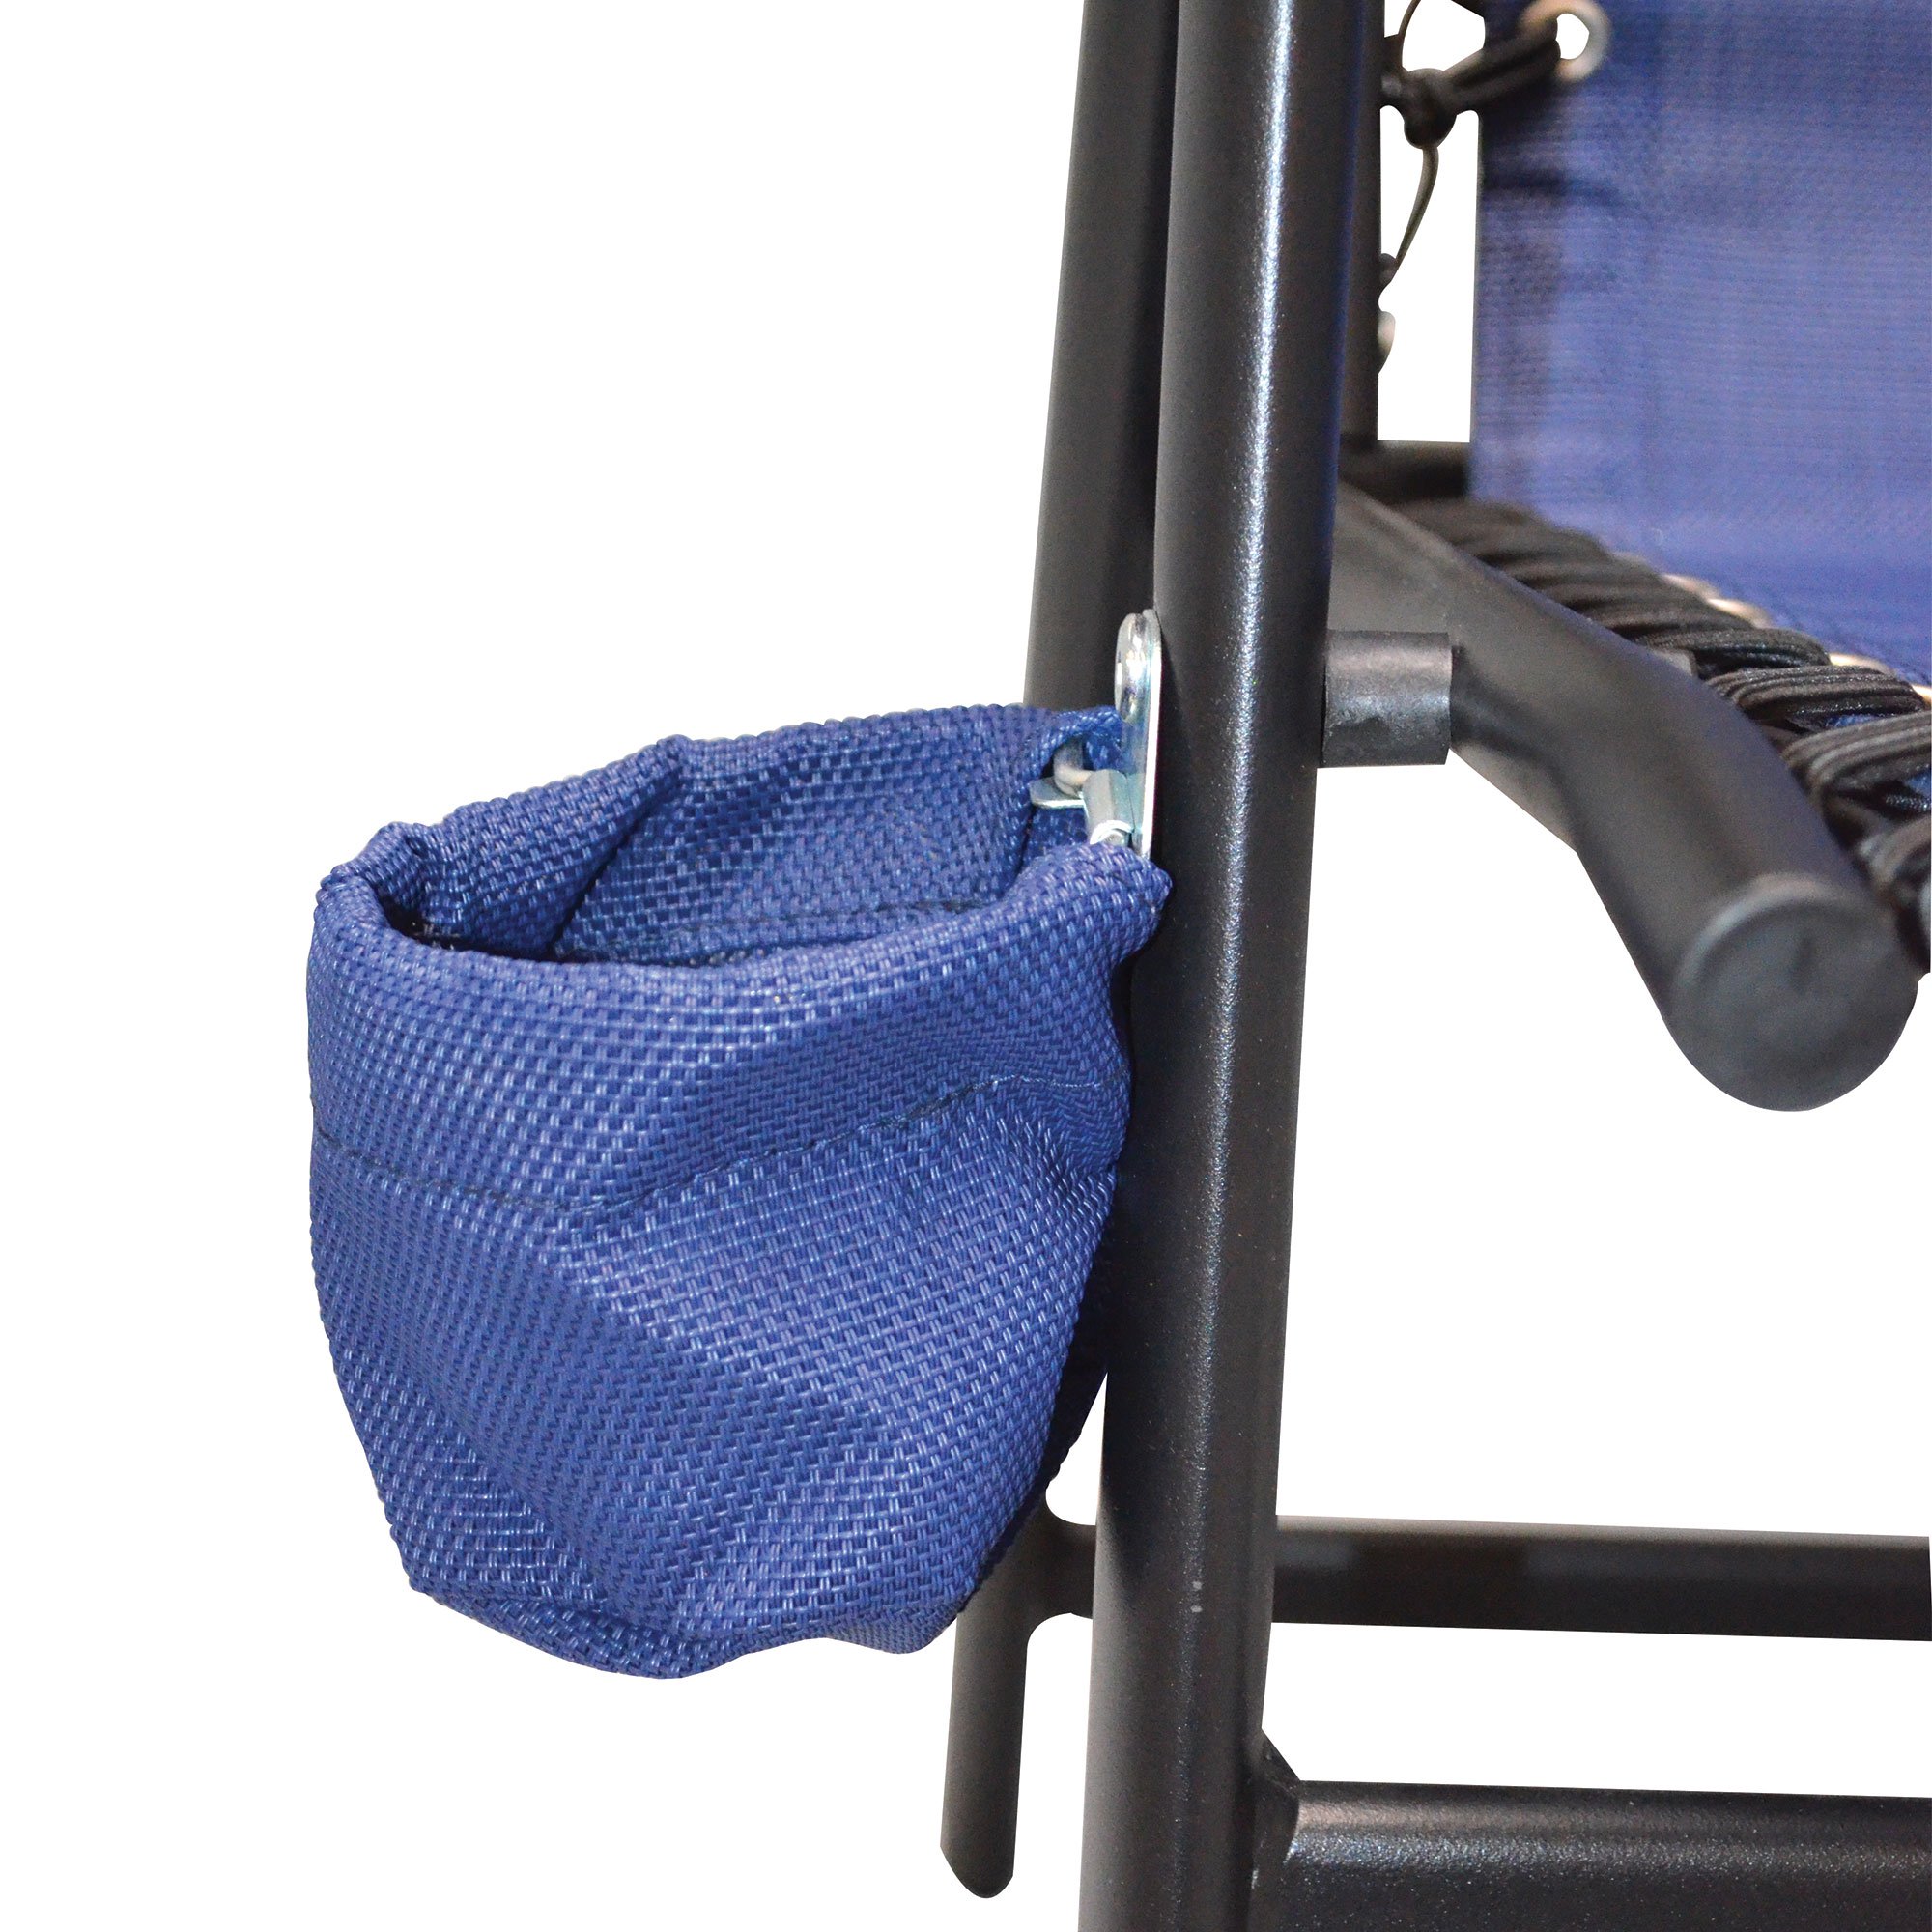 Caravan Canopy Infinity Suspension Folding Chair with Cupholder, Blue (2 Pack) - image 2 of 5